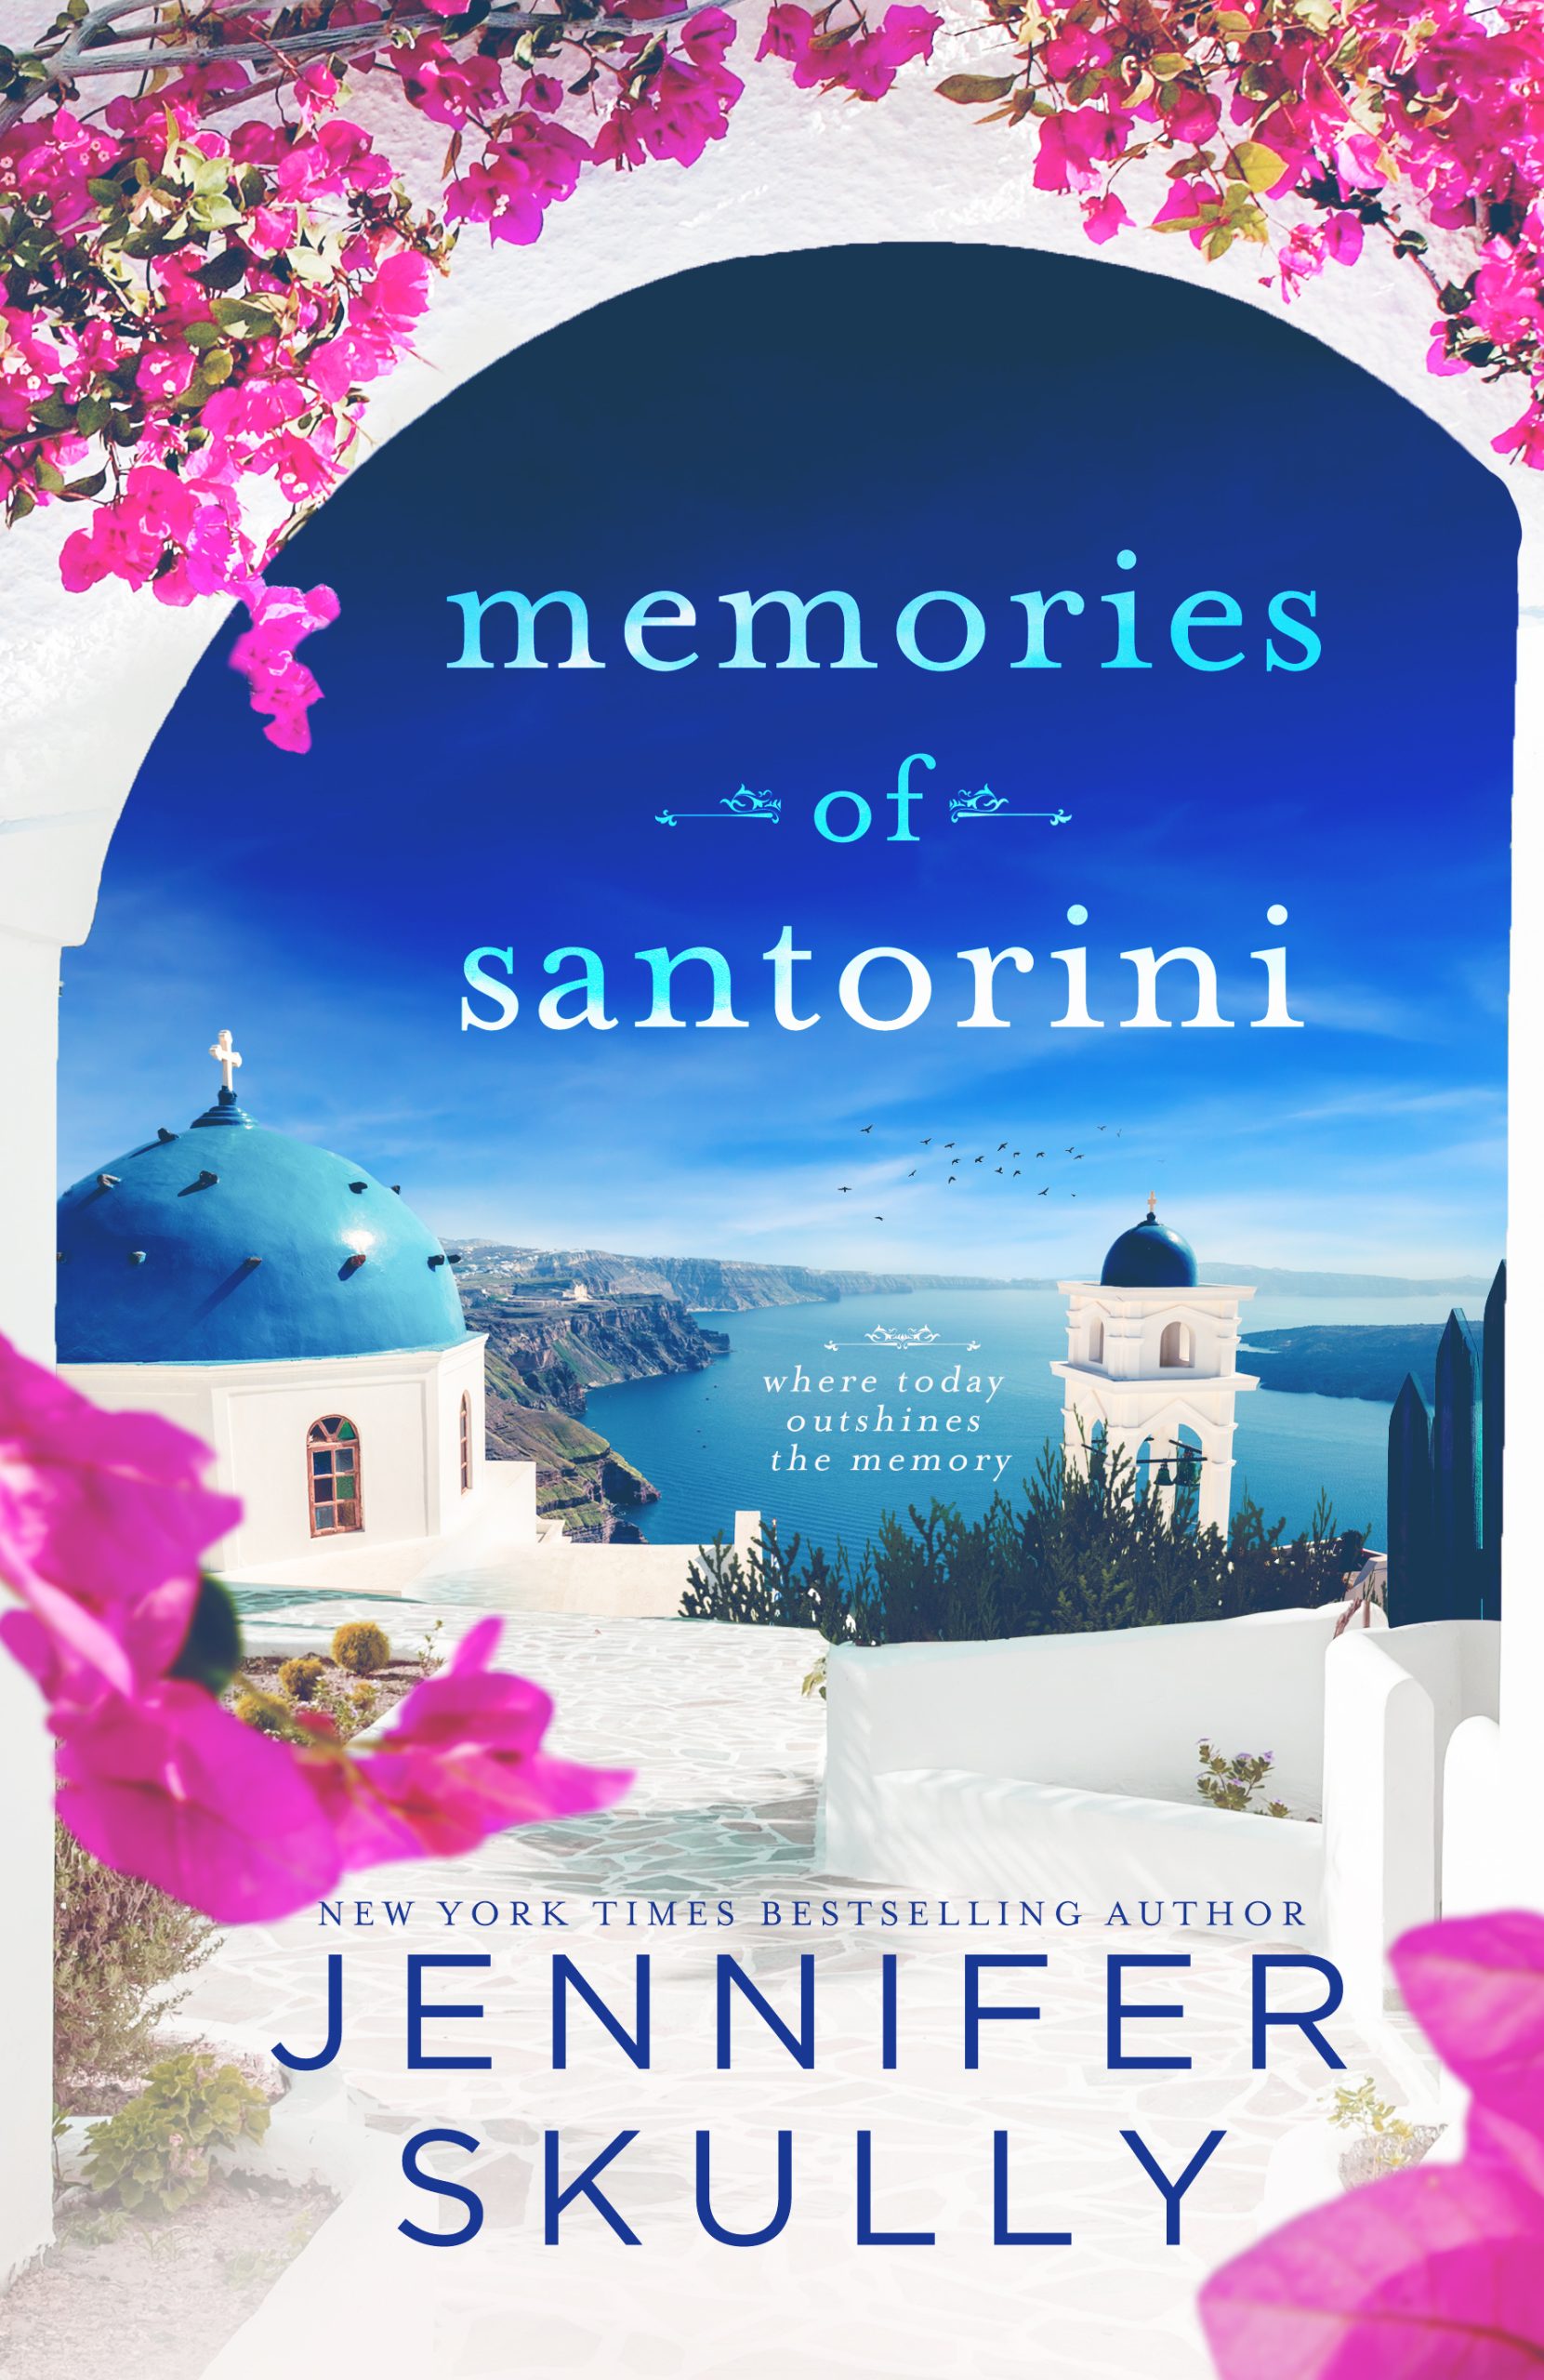 Cover of Memories of Santorini - where today outshines the memory - by New York Times Bestselling Author Jennifer Skully